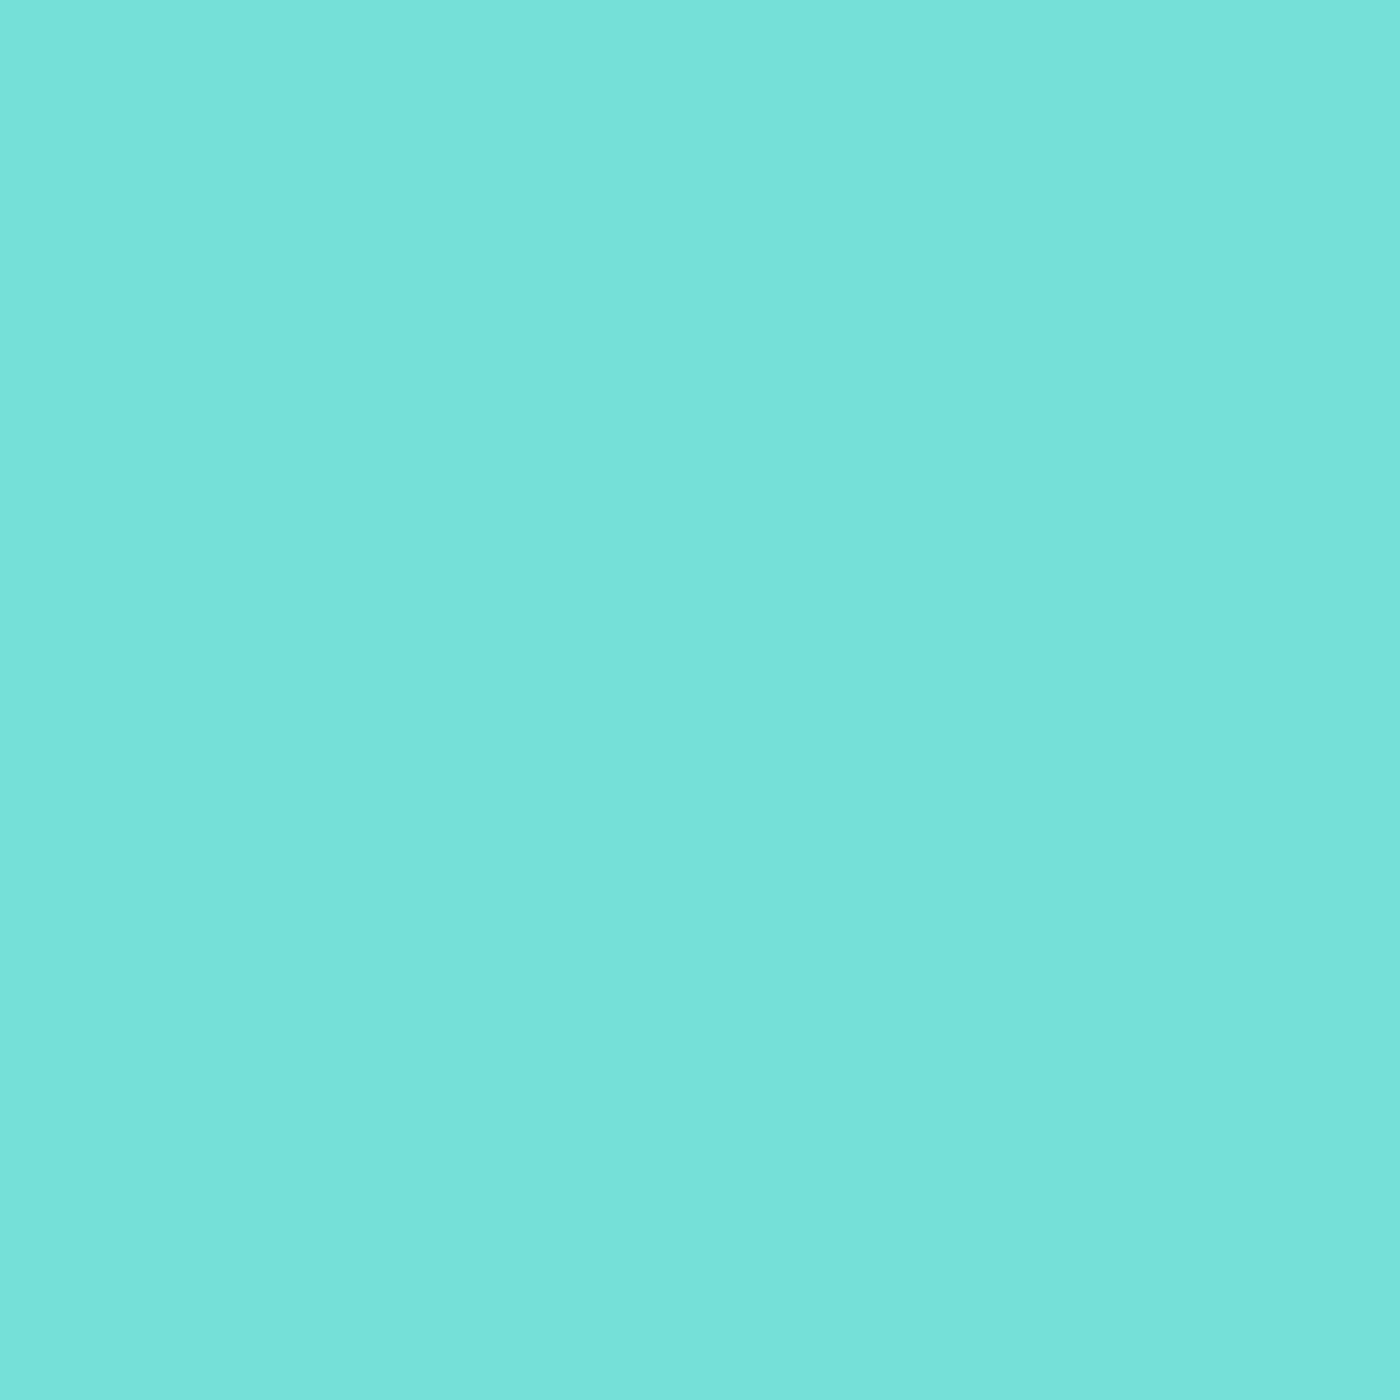 MARINE MIST 12x12 smooth cardstock - Bazzill Smoothies Collection - turquoise blue in color